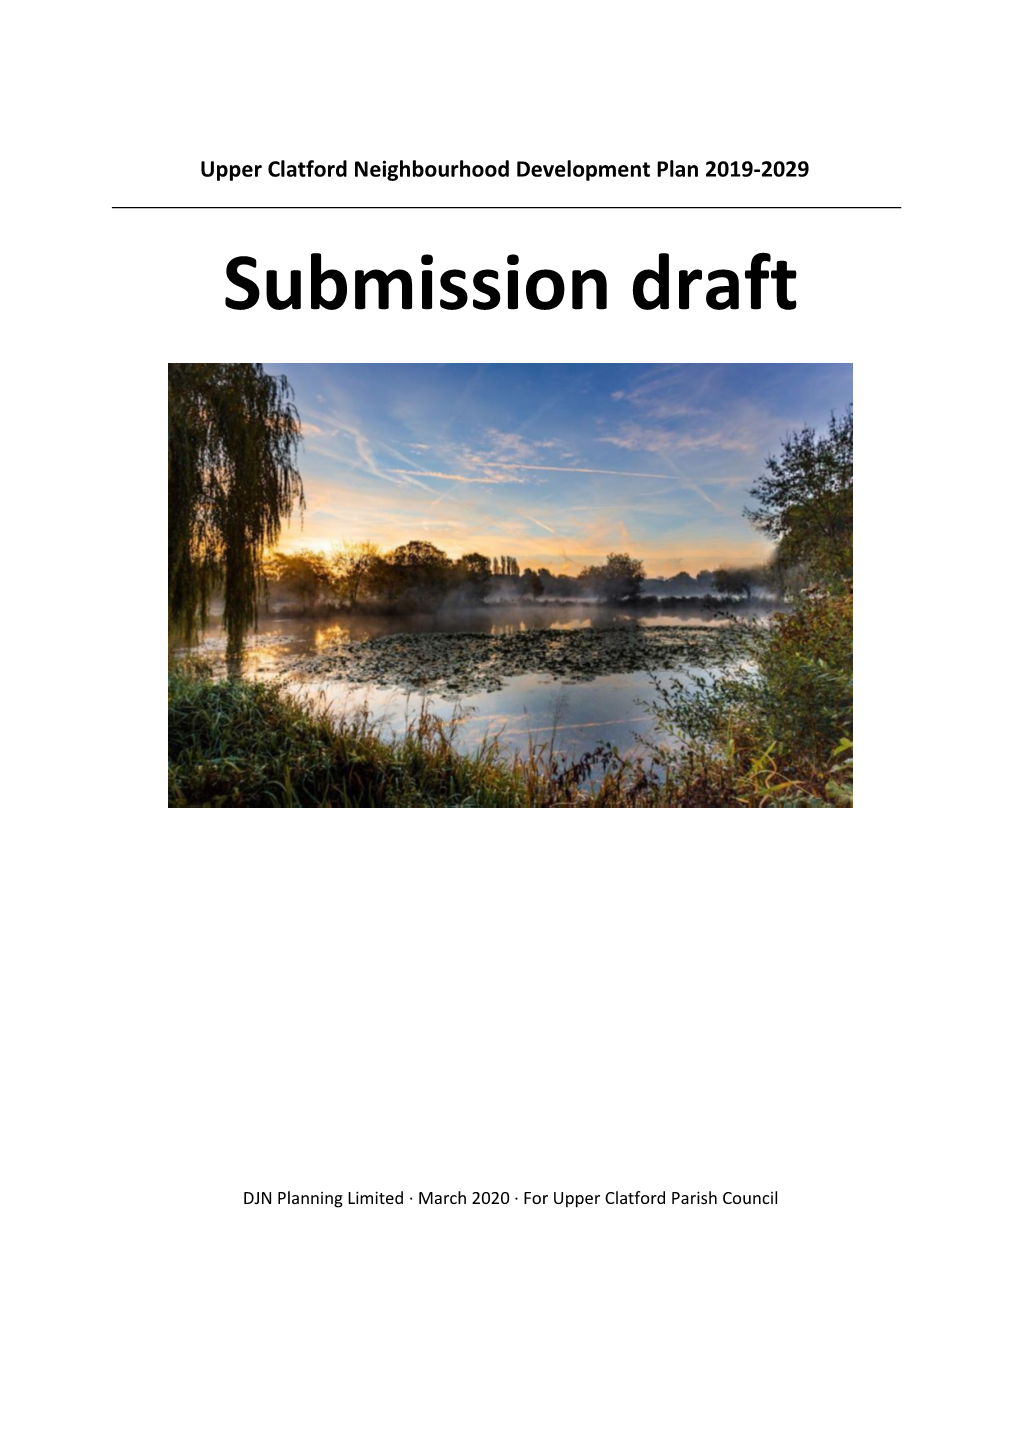 Submission Draft